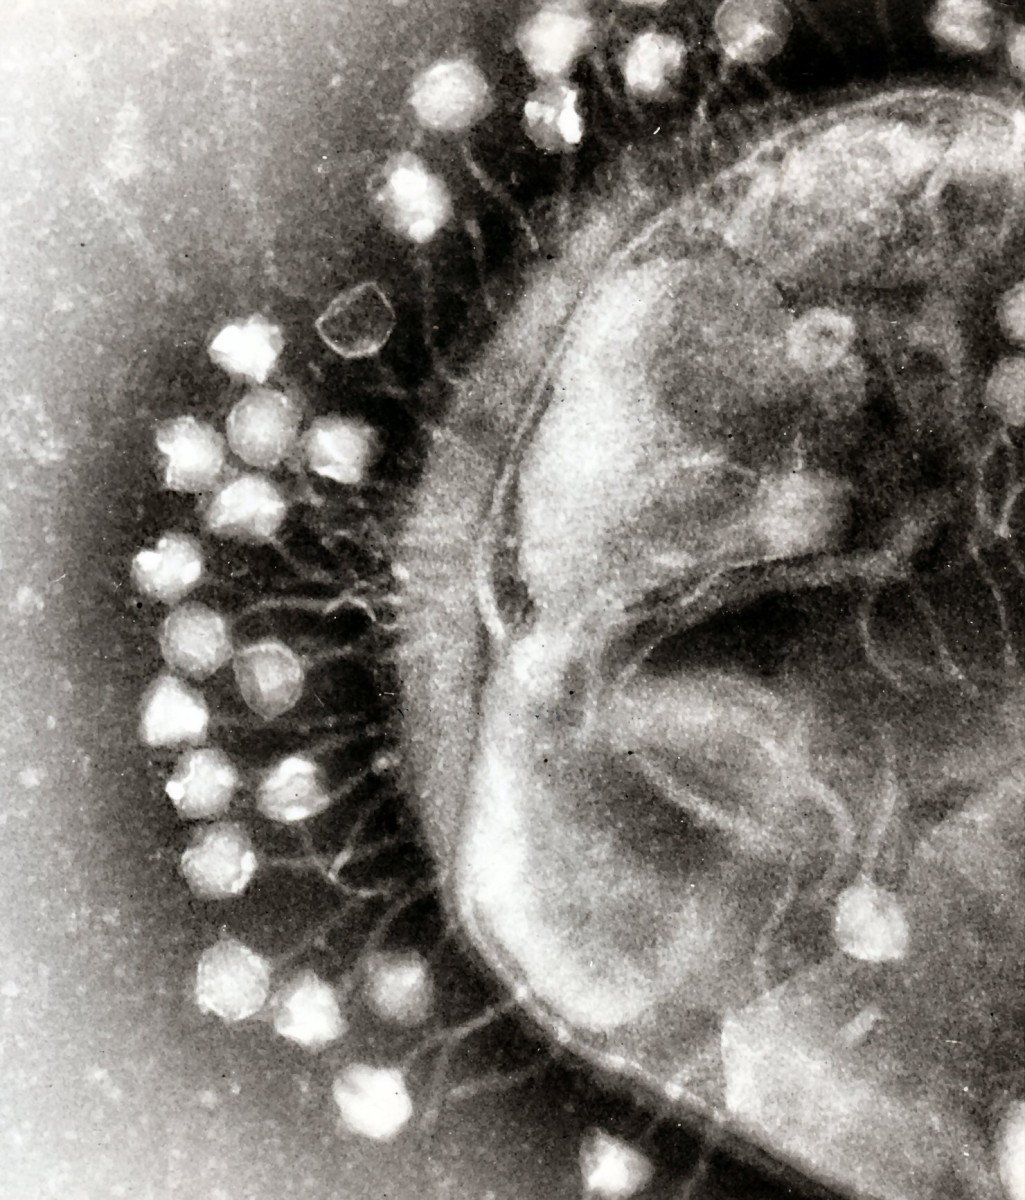 Bacteriophages attached to the outside of a bacterial cell.